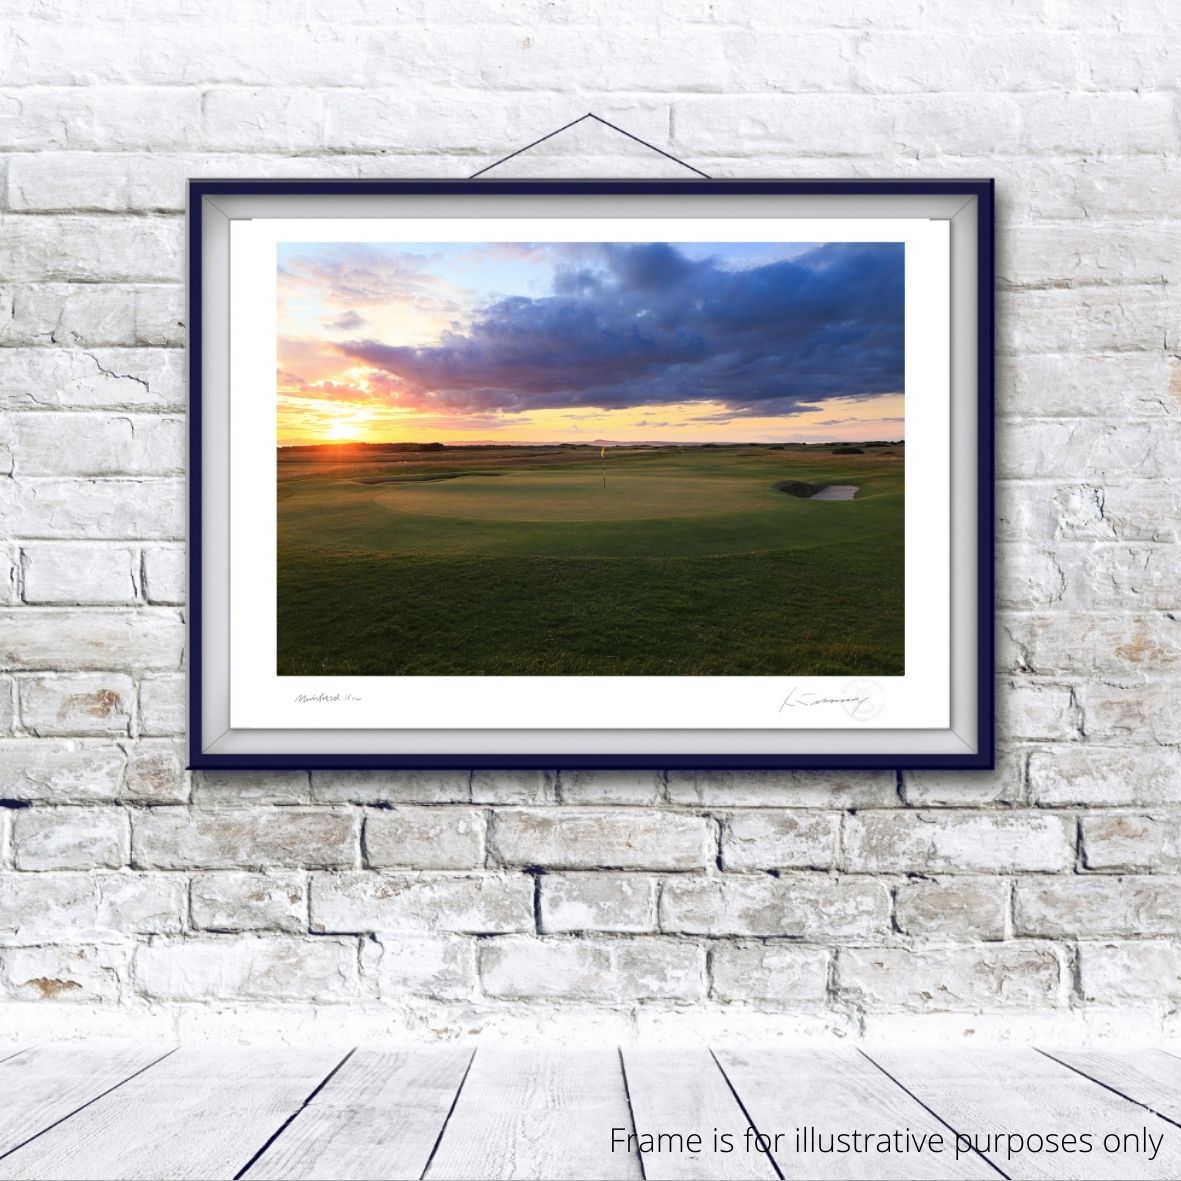 Muirfield 18th by Kevin Murray